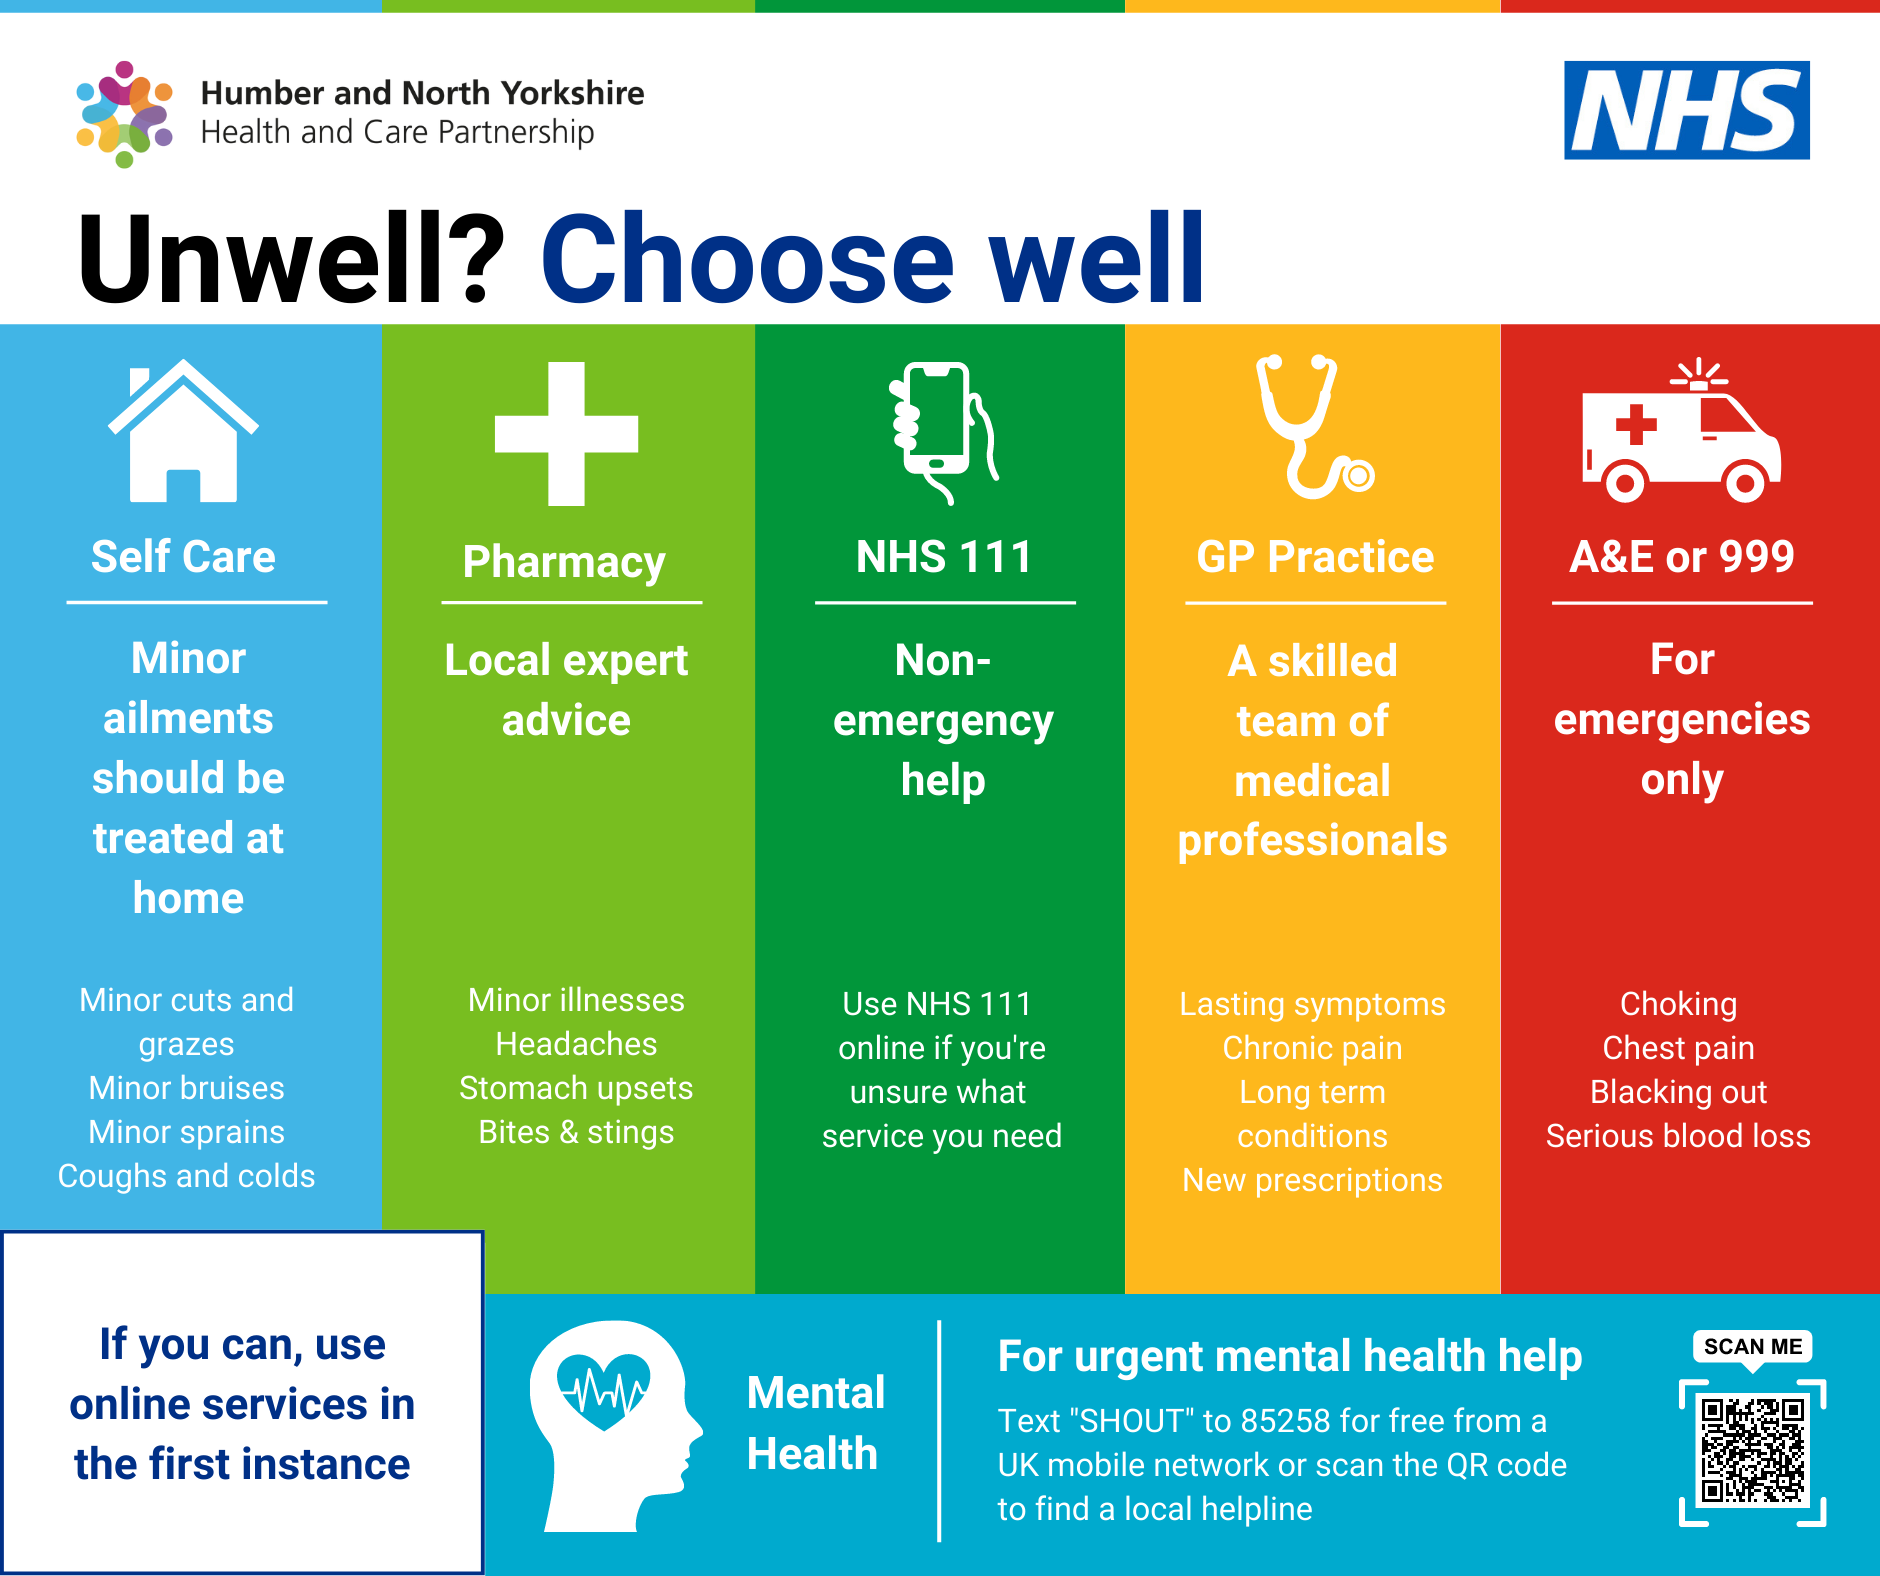 Unwell? Choose well. Self care is for minor ailments that should be treated at home (minor cuts and grazes, bruises, sprains, coughs and colds). Pharmacy is for local expert advice (minor illnesses, headaches, stomach upsets, bites and stings). NHS 111 is for non emergency help (use NHS111 online if you're unsure what service you need). GP practice is for a skilled team of medical professionals (lasting symptoms, chronic pain, long term conditions) and A&E or 999 for emergencies only. Mental health- for urgent help text SHOUT to  85258 for free from a UK mobile network or scan the QR code to find a local helpline.